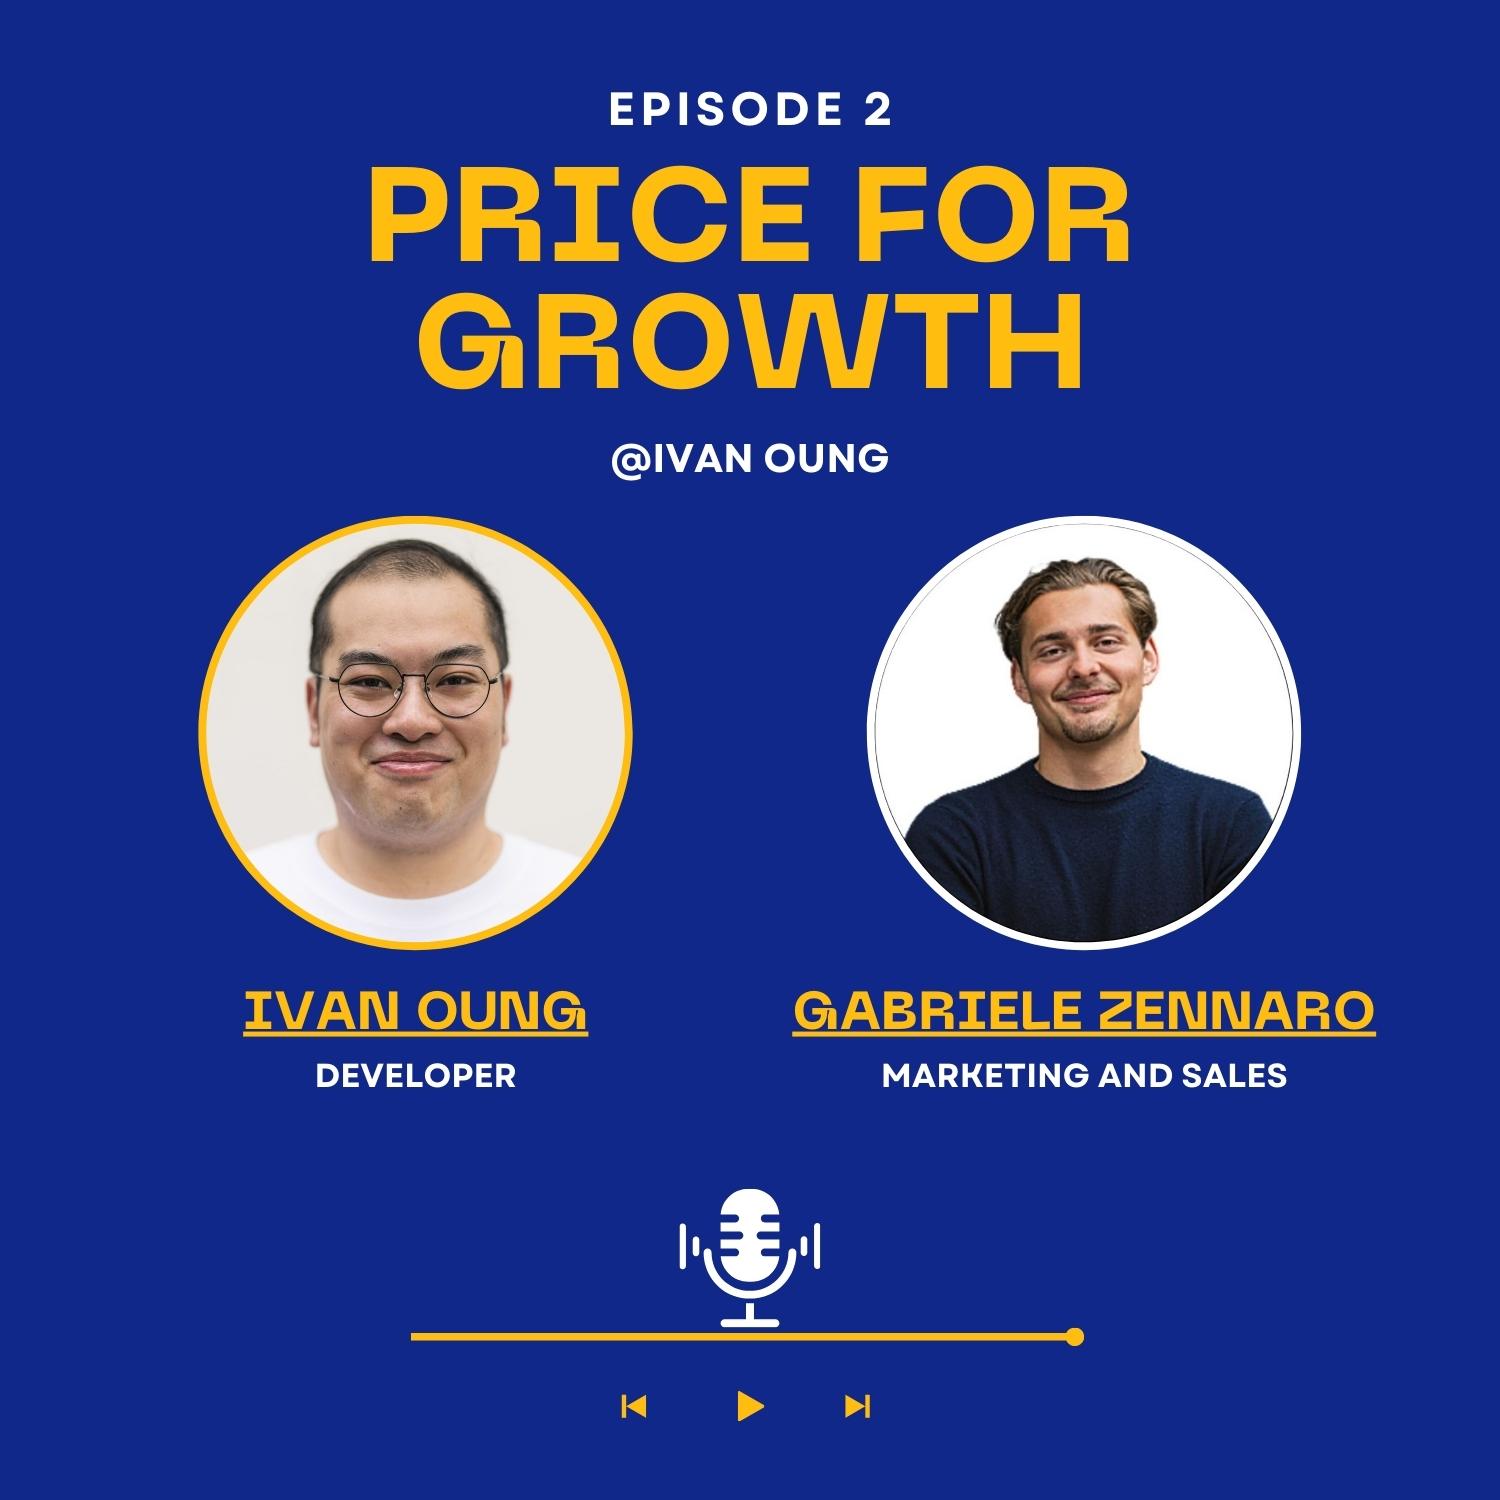 Gabriele Zennaro speaking about Product Management at Ivan Oung's podcast - "Price For Growth".